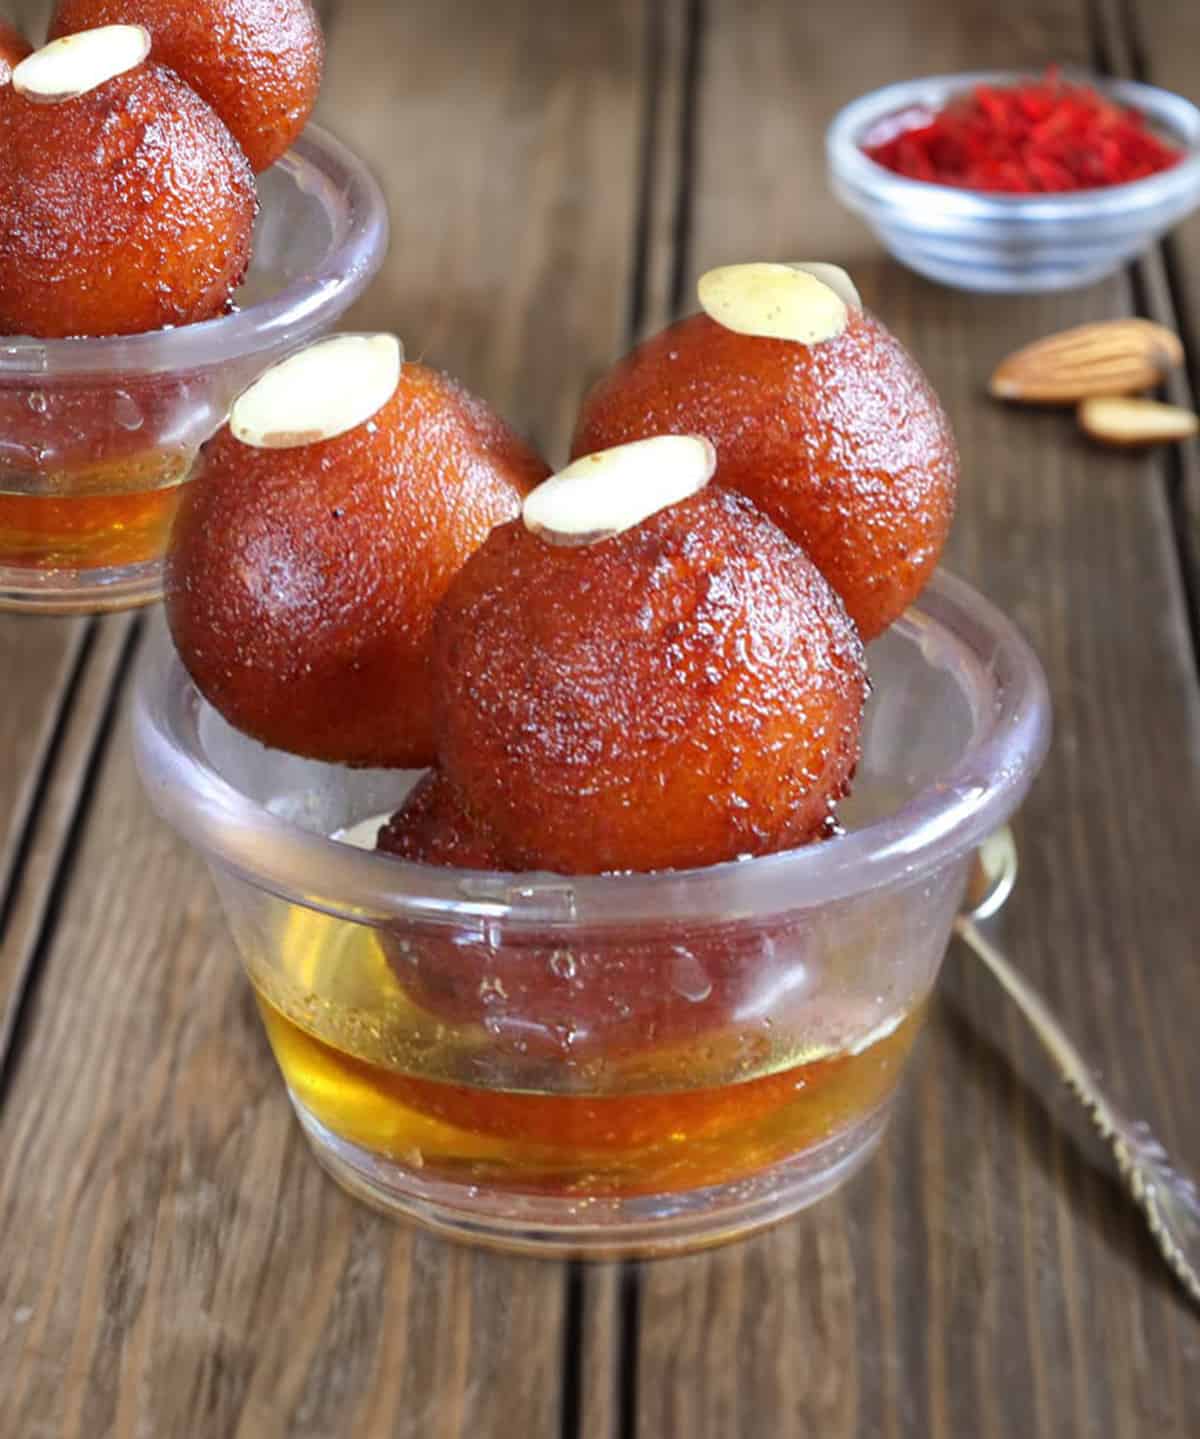 Nest homemade gulab jamun served in glass bowls with saffron-flavored sugar syrup.